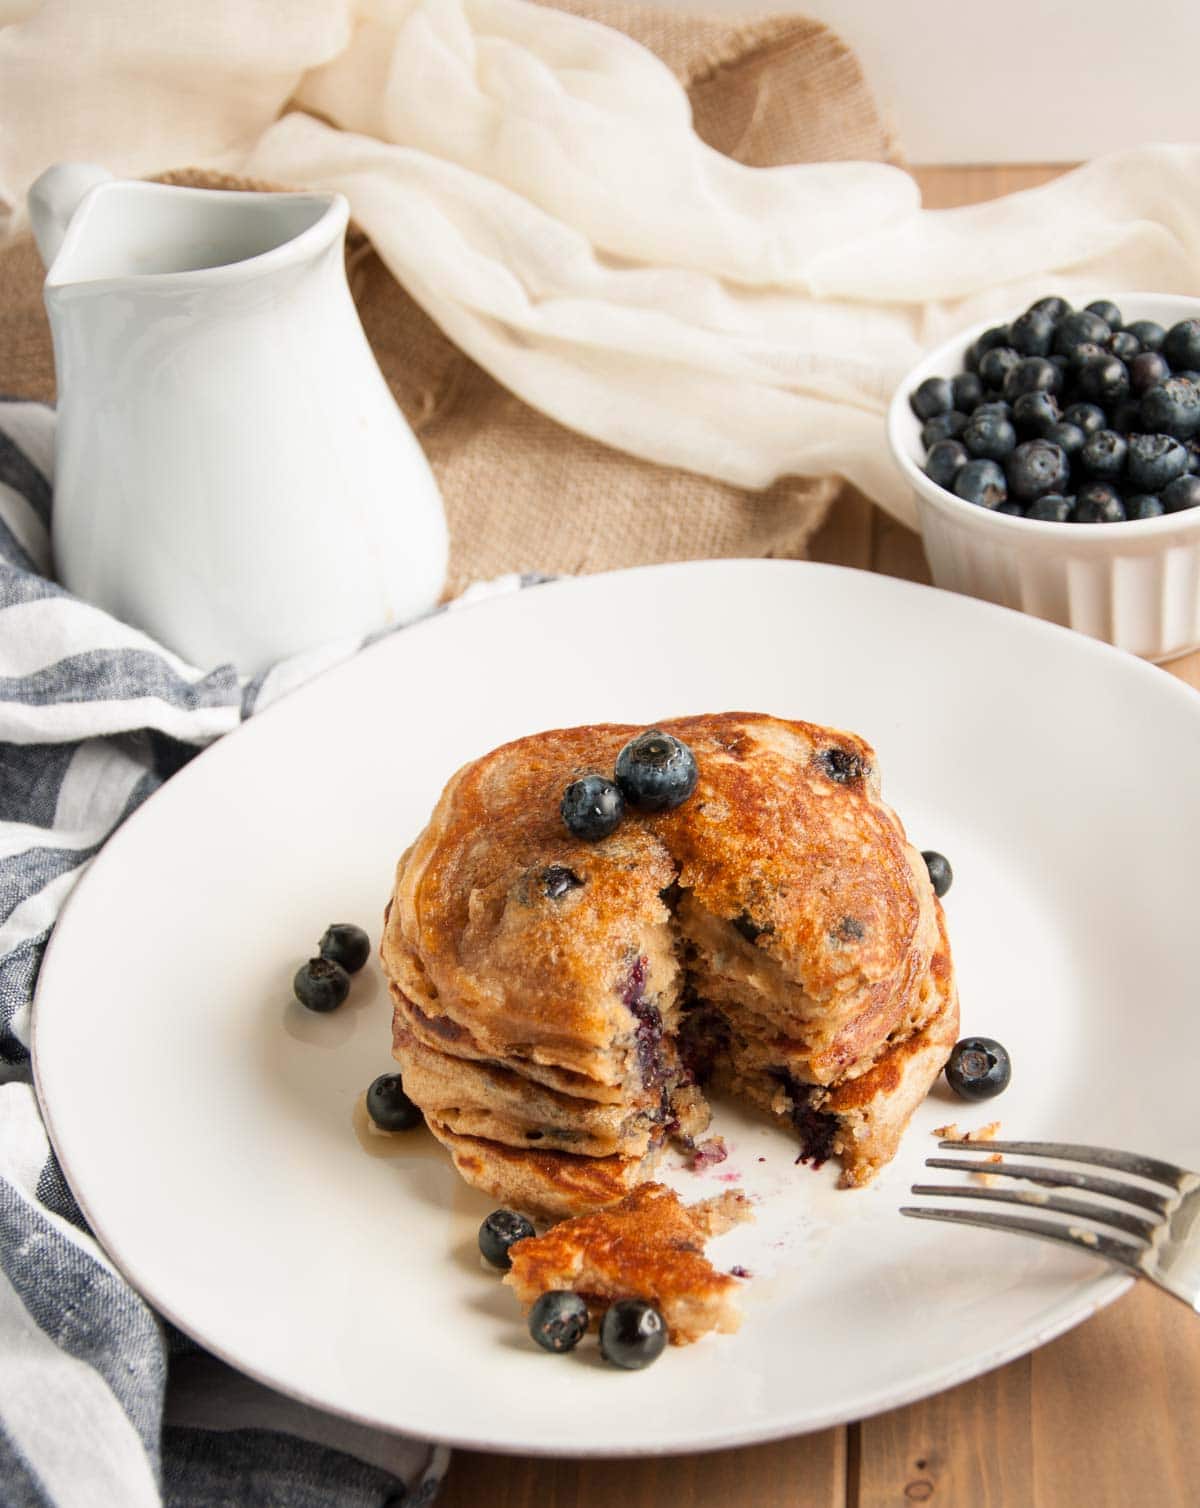 These thick, rich, delicious yogurt pancakes are a breakfast winner both in taste and nutrition, made with whole wheat flour, Greek yogurt, and blueberries.